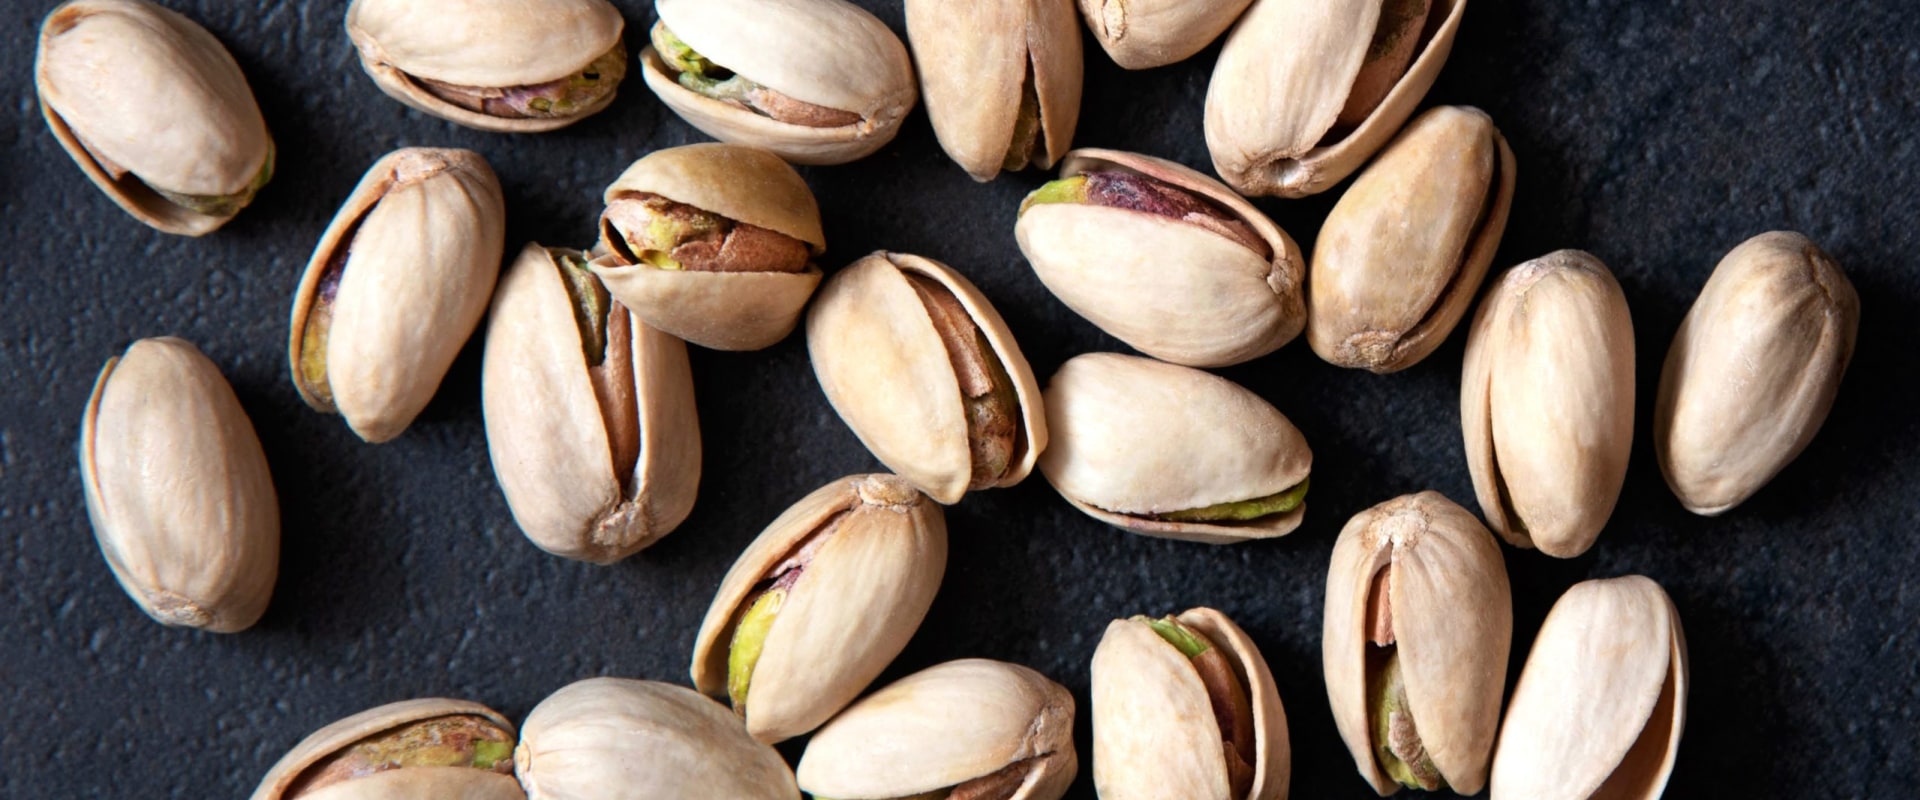 Are pistachios or cashews more expensive?